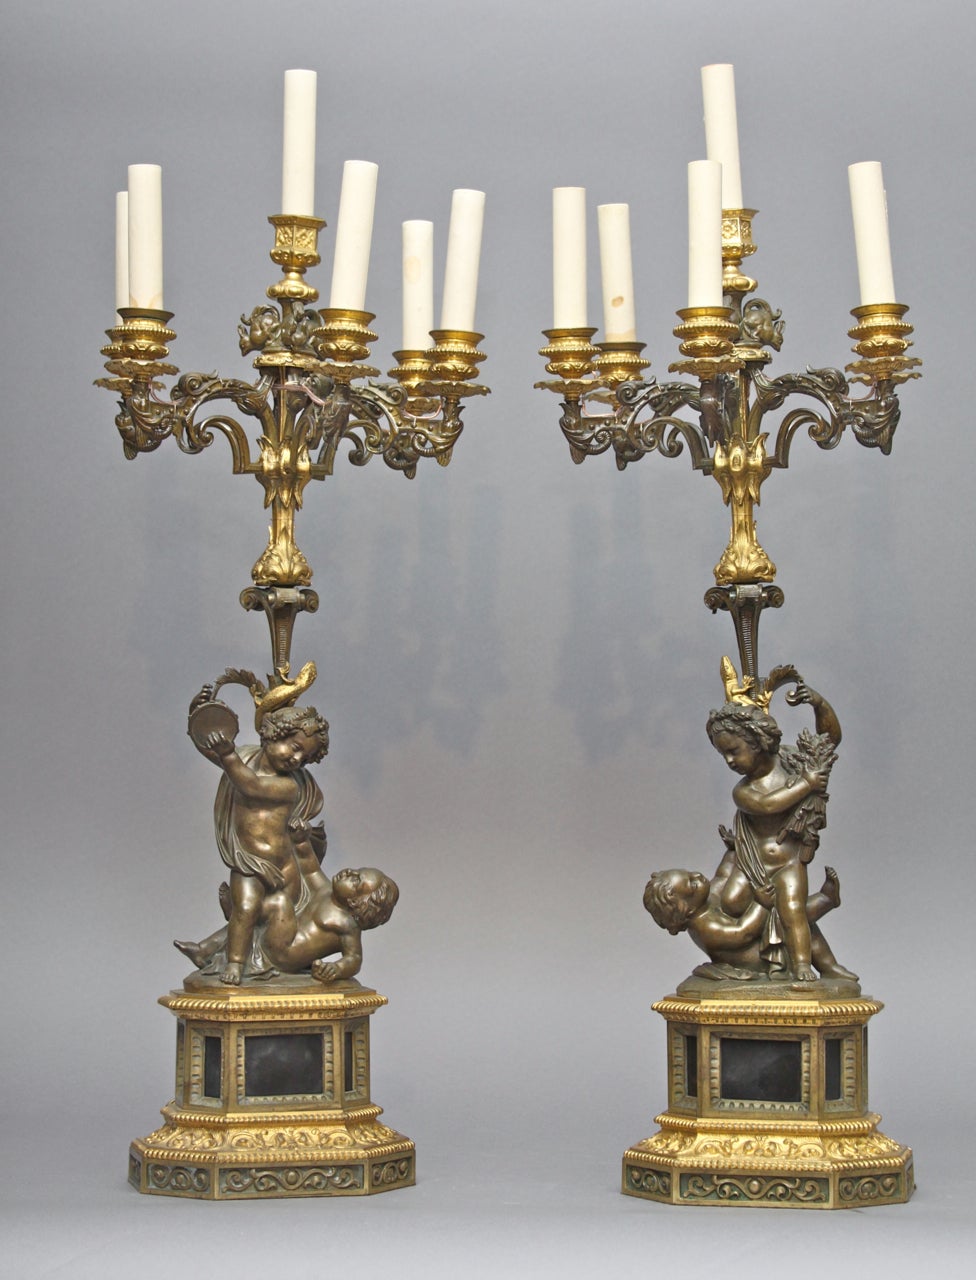 Each with a pair of putti wrestling, the standard cast with lizards, supporting six scrolled candle arms and one center candle surrounded by three squirrels, raised on hexagonal bases. Fitted for electricity.